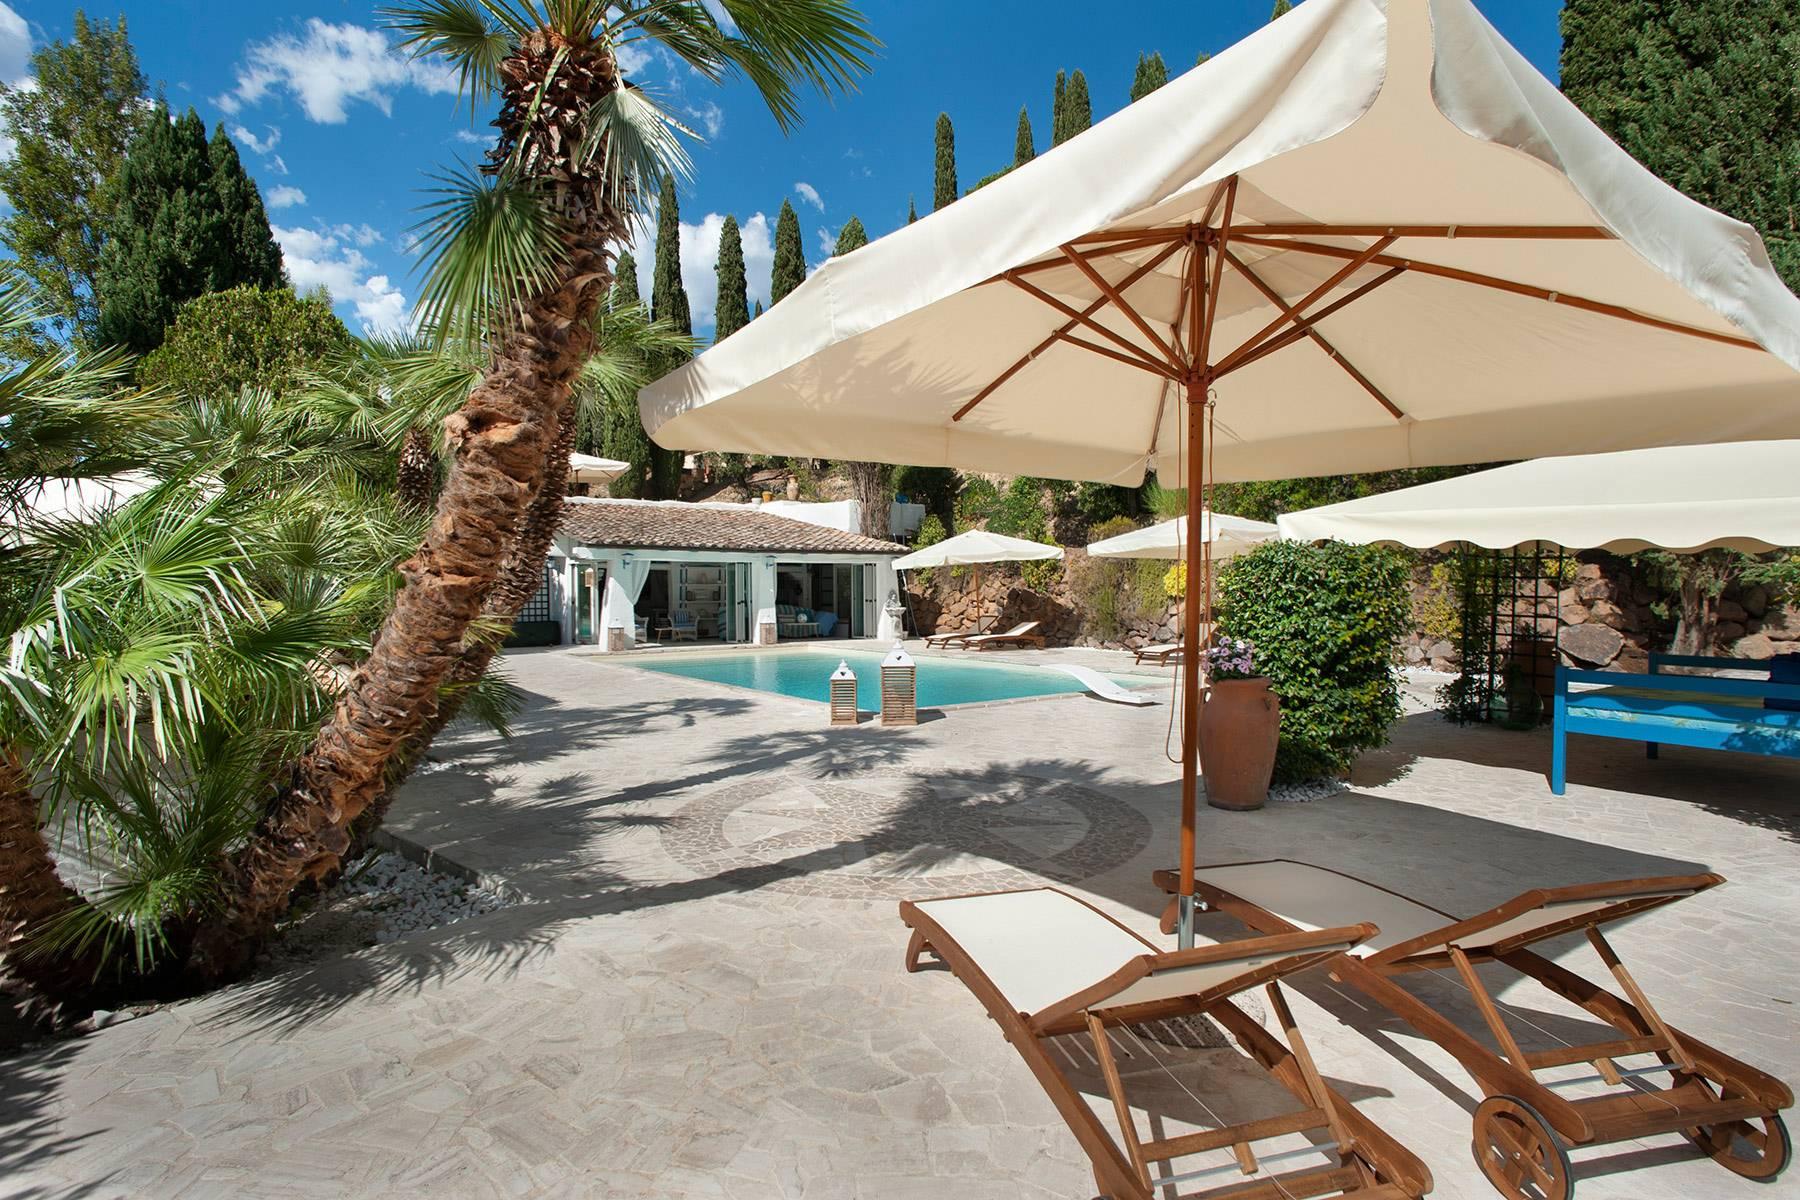 Villa Nayara - Lovely mansion with swimming pool 30 minutes from Rome - 36